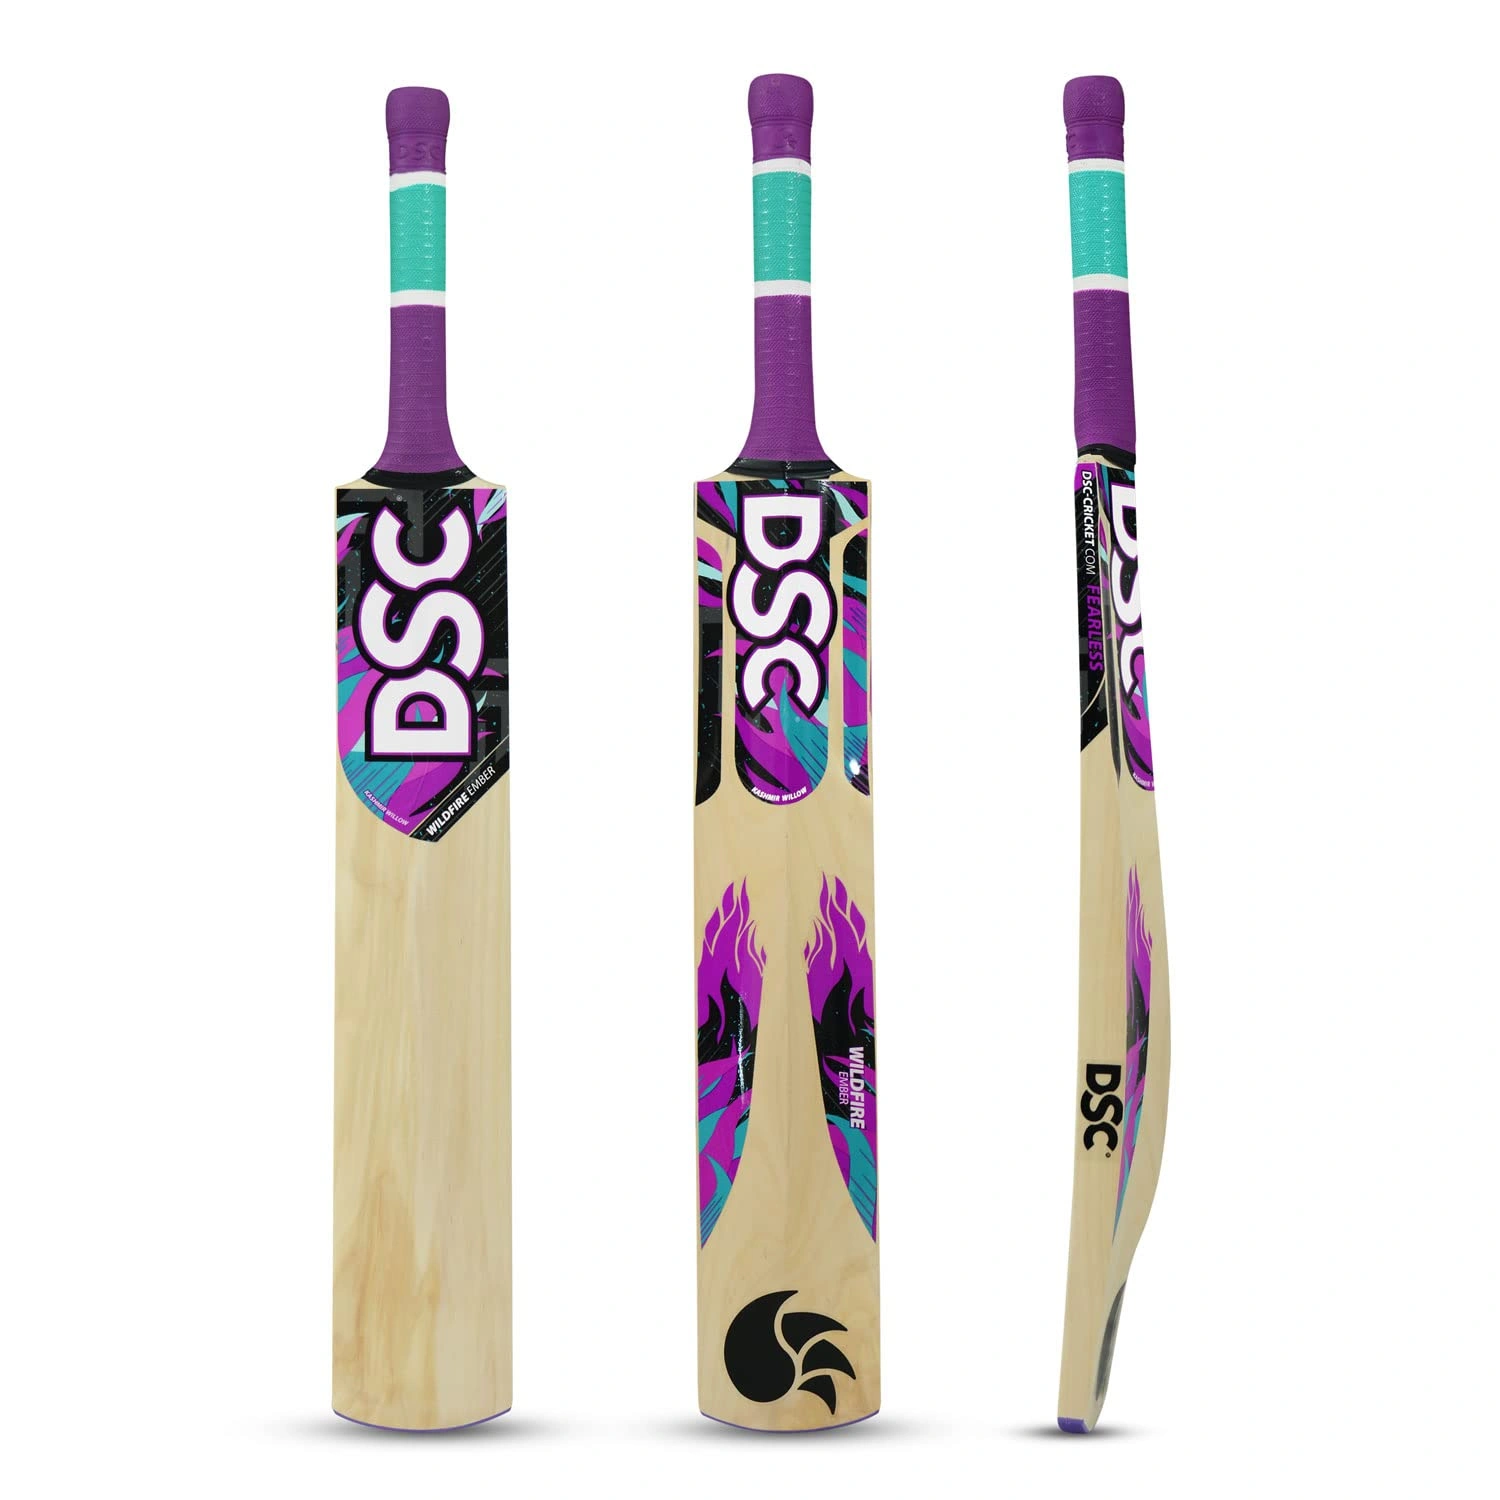 DSC Wildfire Ember Kashmir Willow Cricket Bat: Affordable and High-Performing Cricket Bat for Tennis Ball Cricket-FS-5